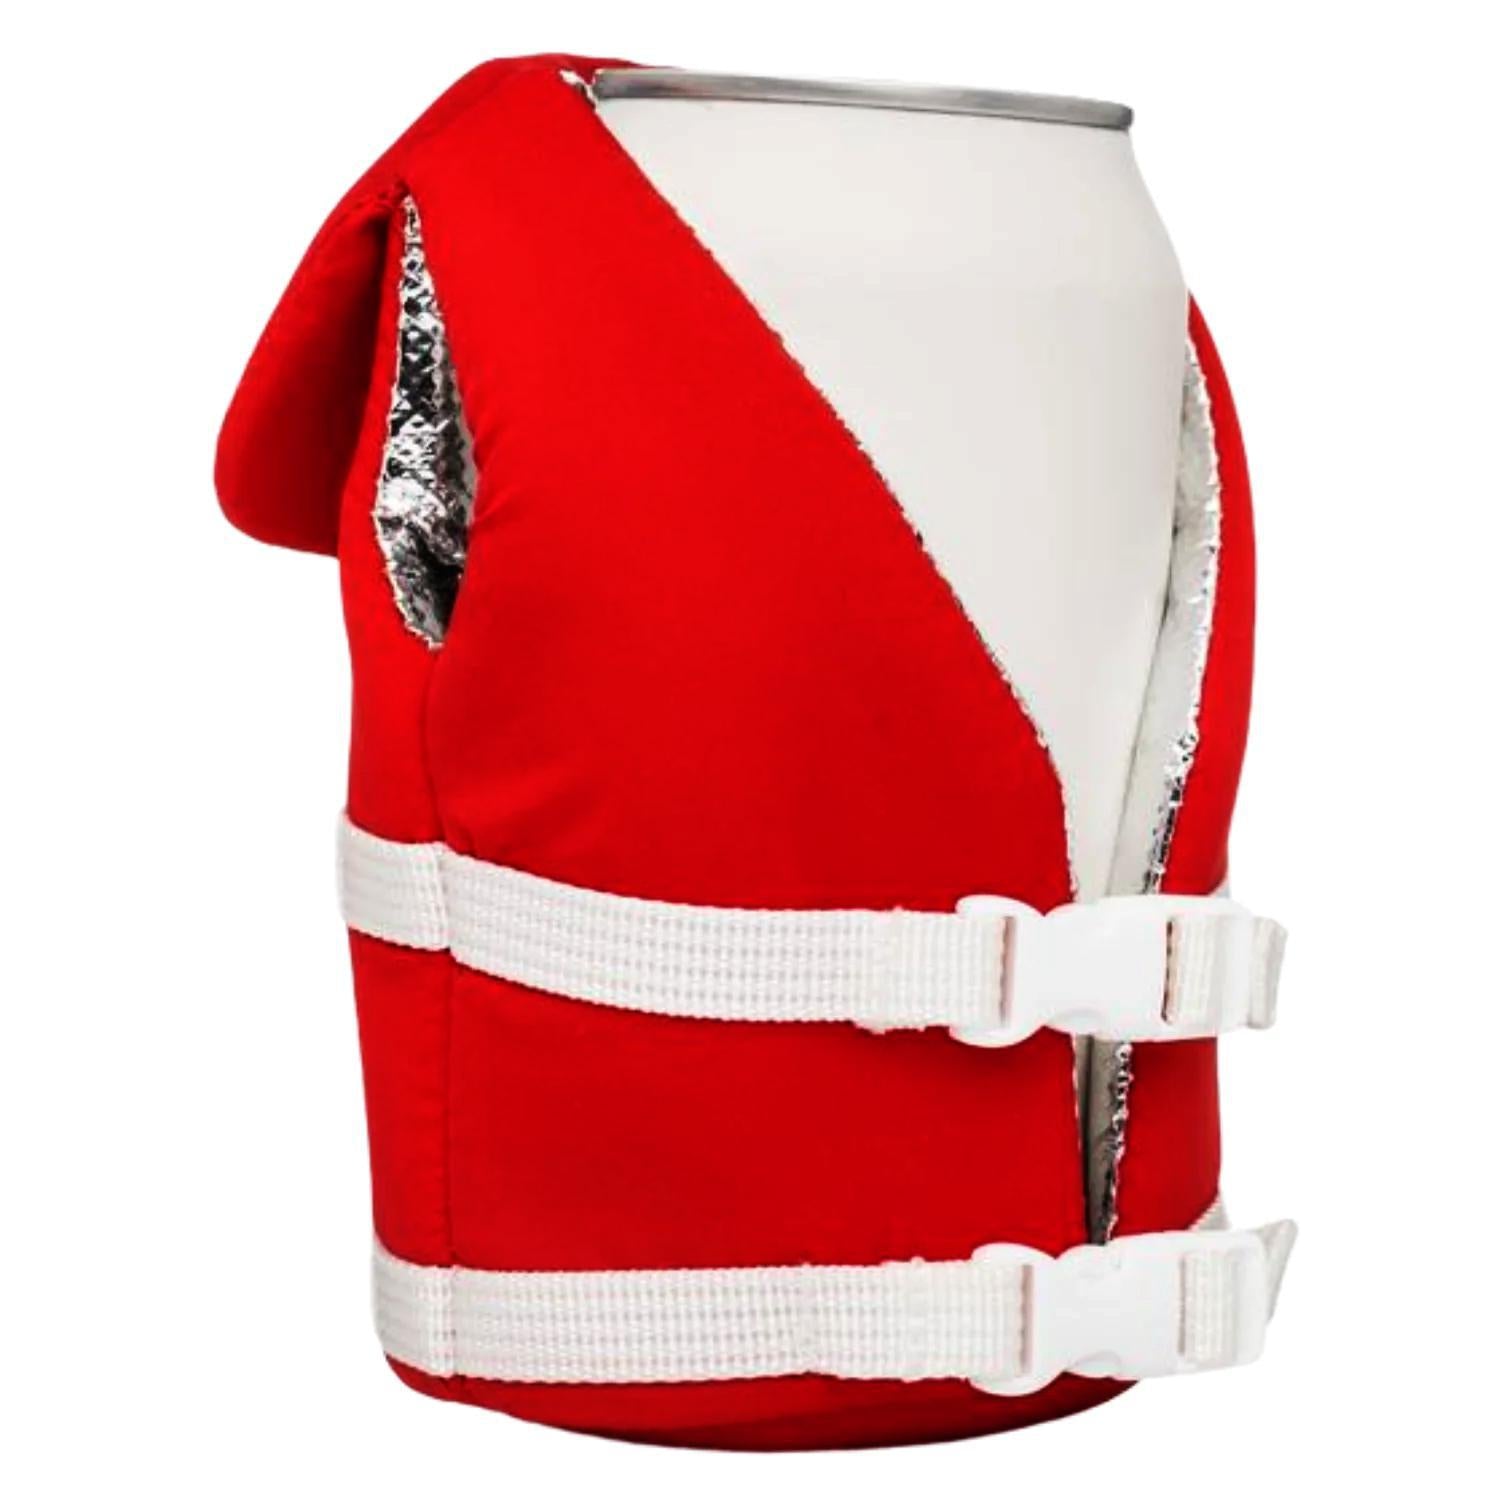 red Beverage Life Vest - Insulated Can Cooler or koozie